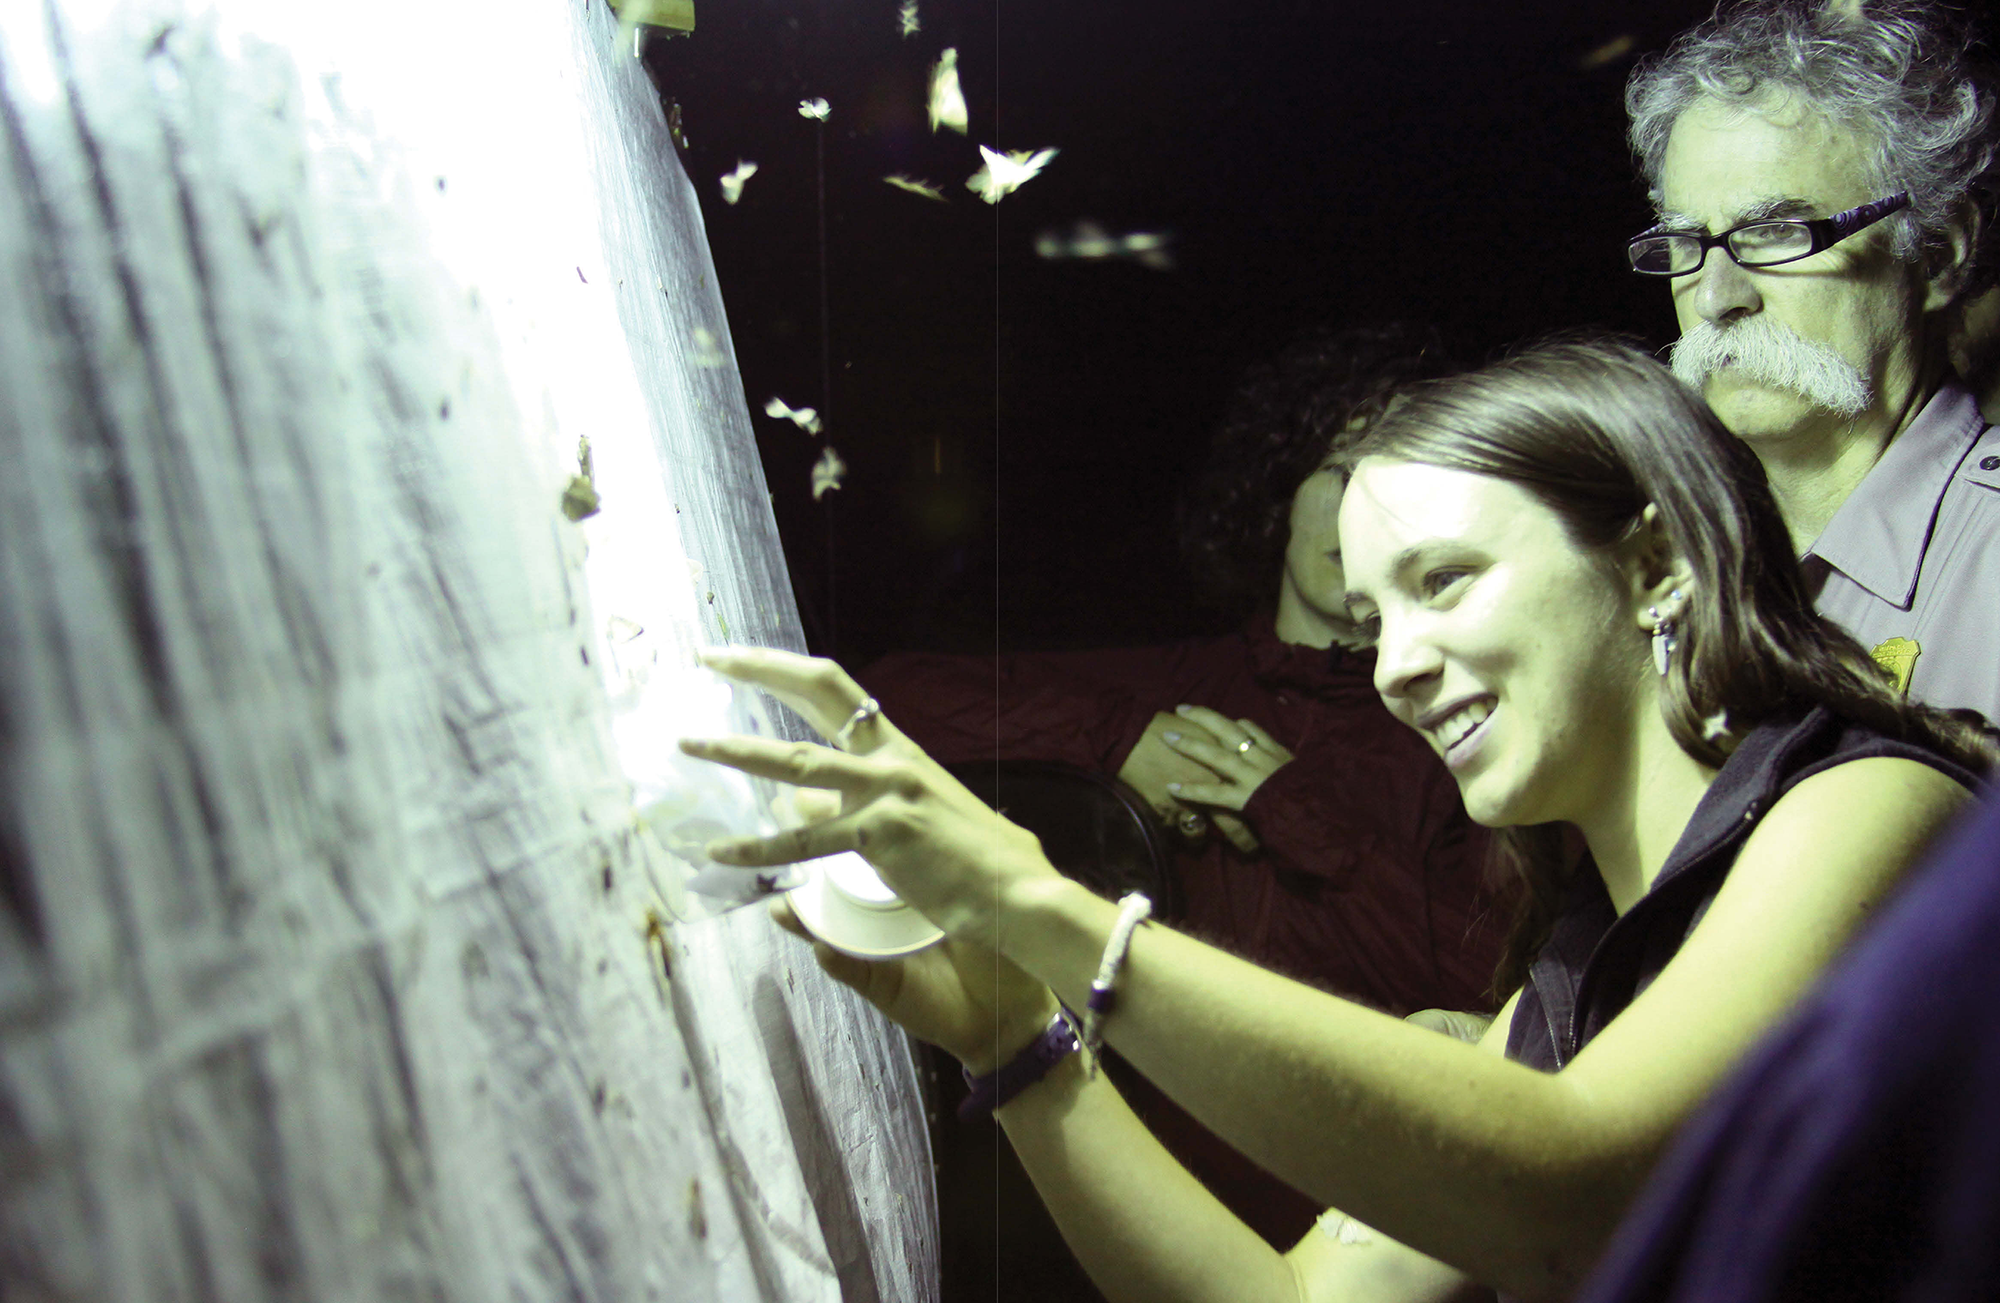 A young woman gathers flying insects from a white sheet that is backlit at night while a park resource manager looks on.